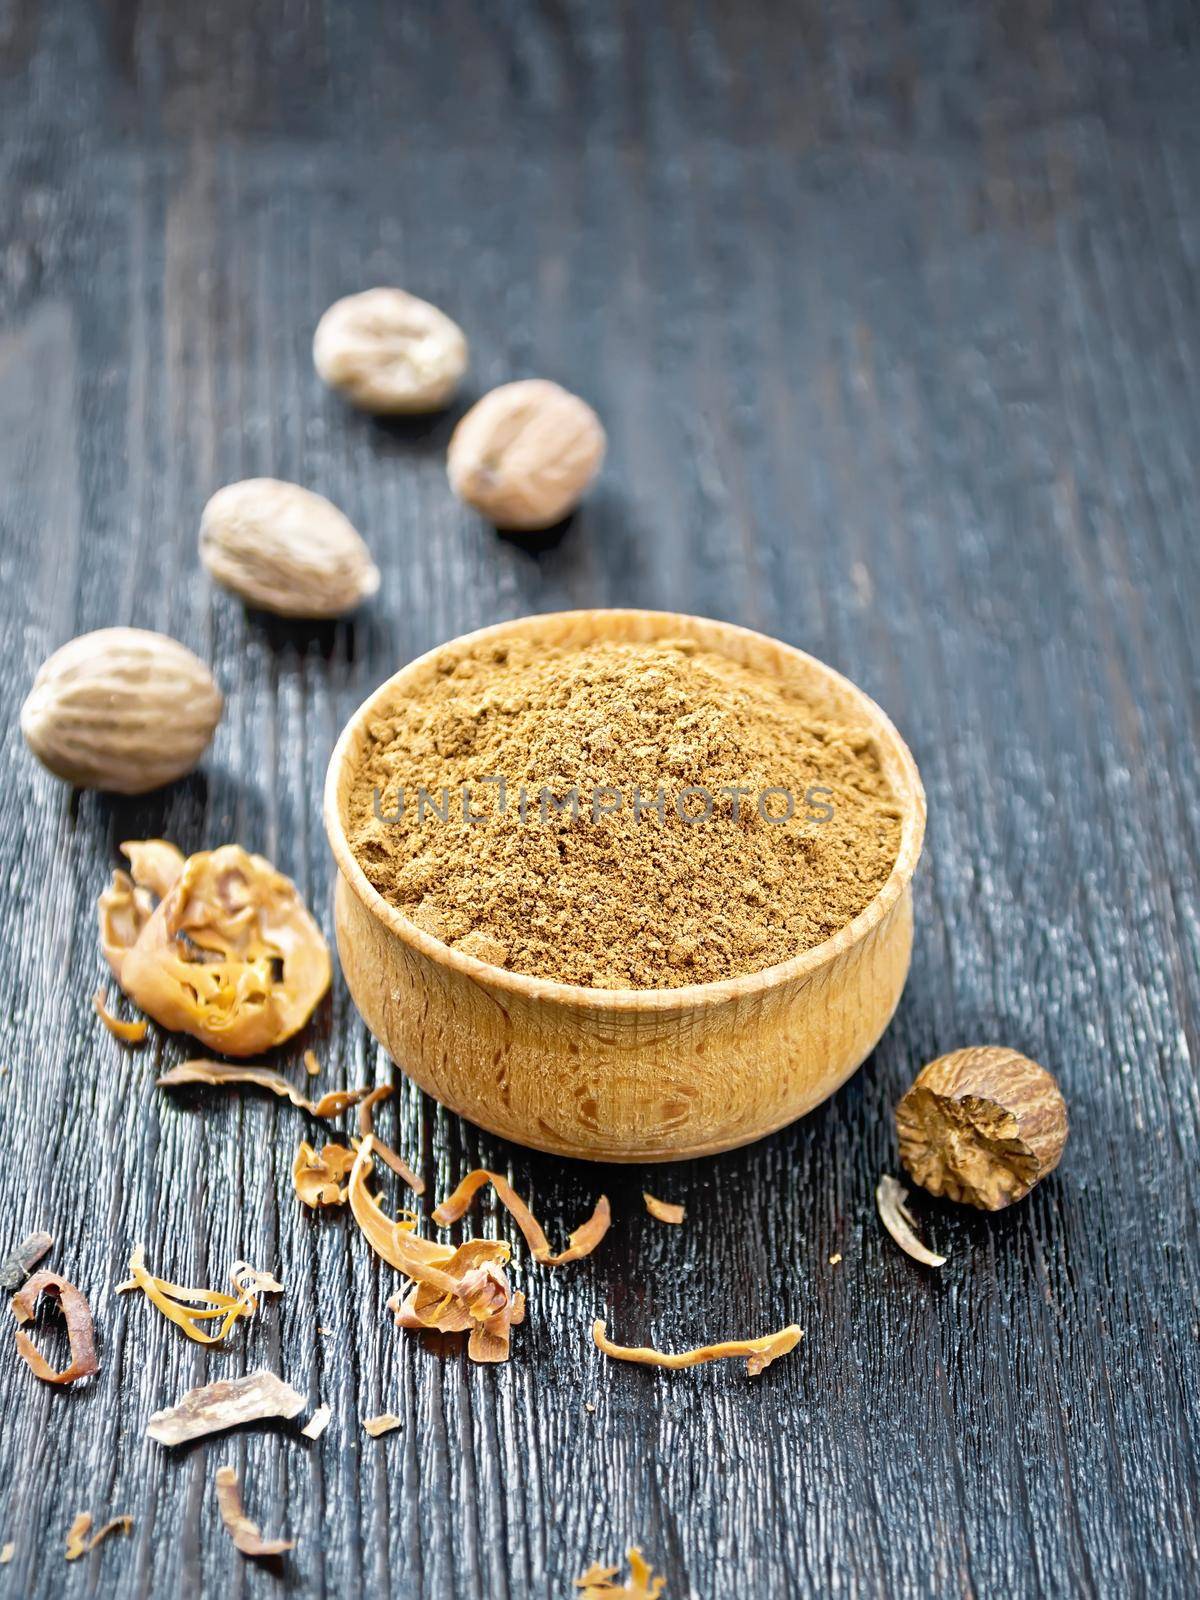 Ground nutmeg in a bowl, dried nutmeg arillus and whole nuts on a black wooden board background